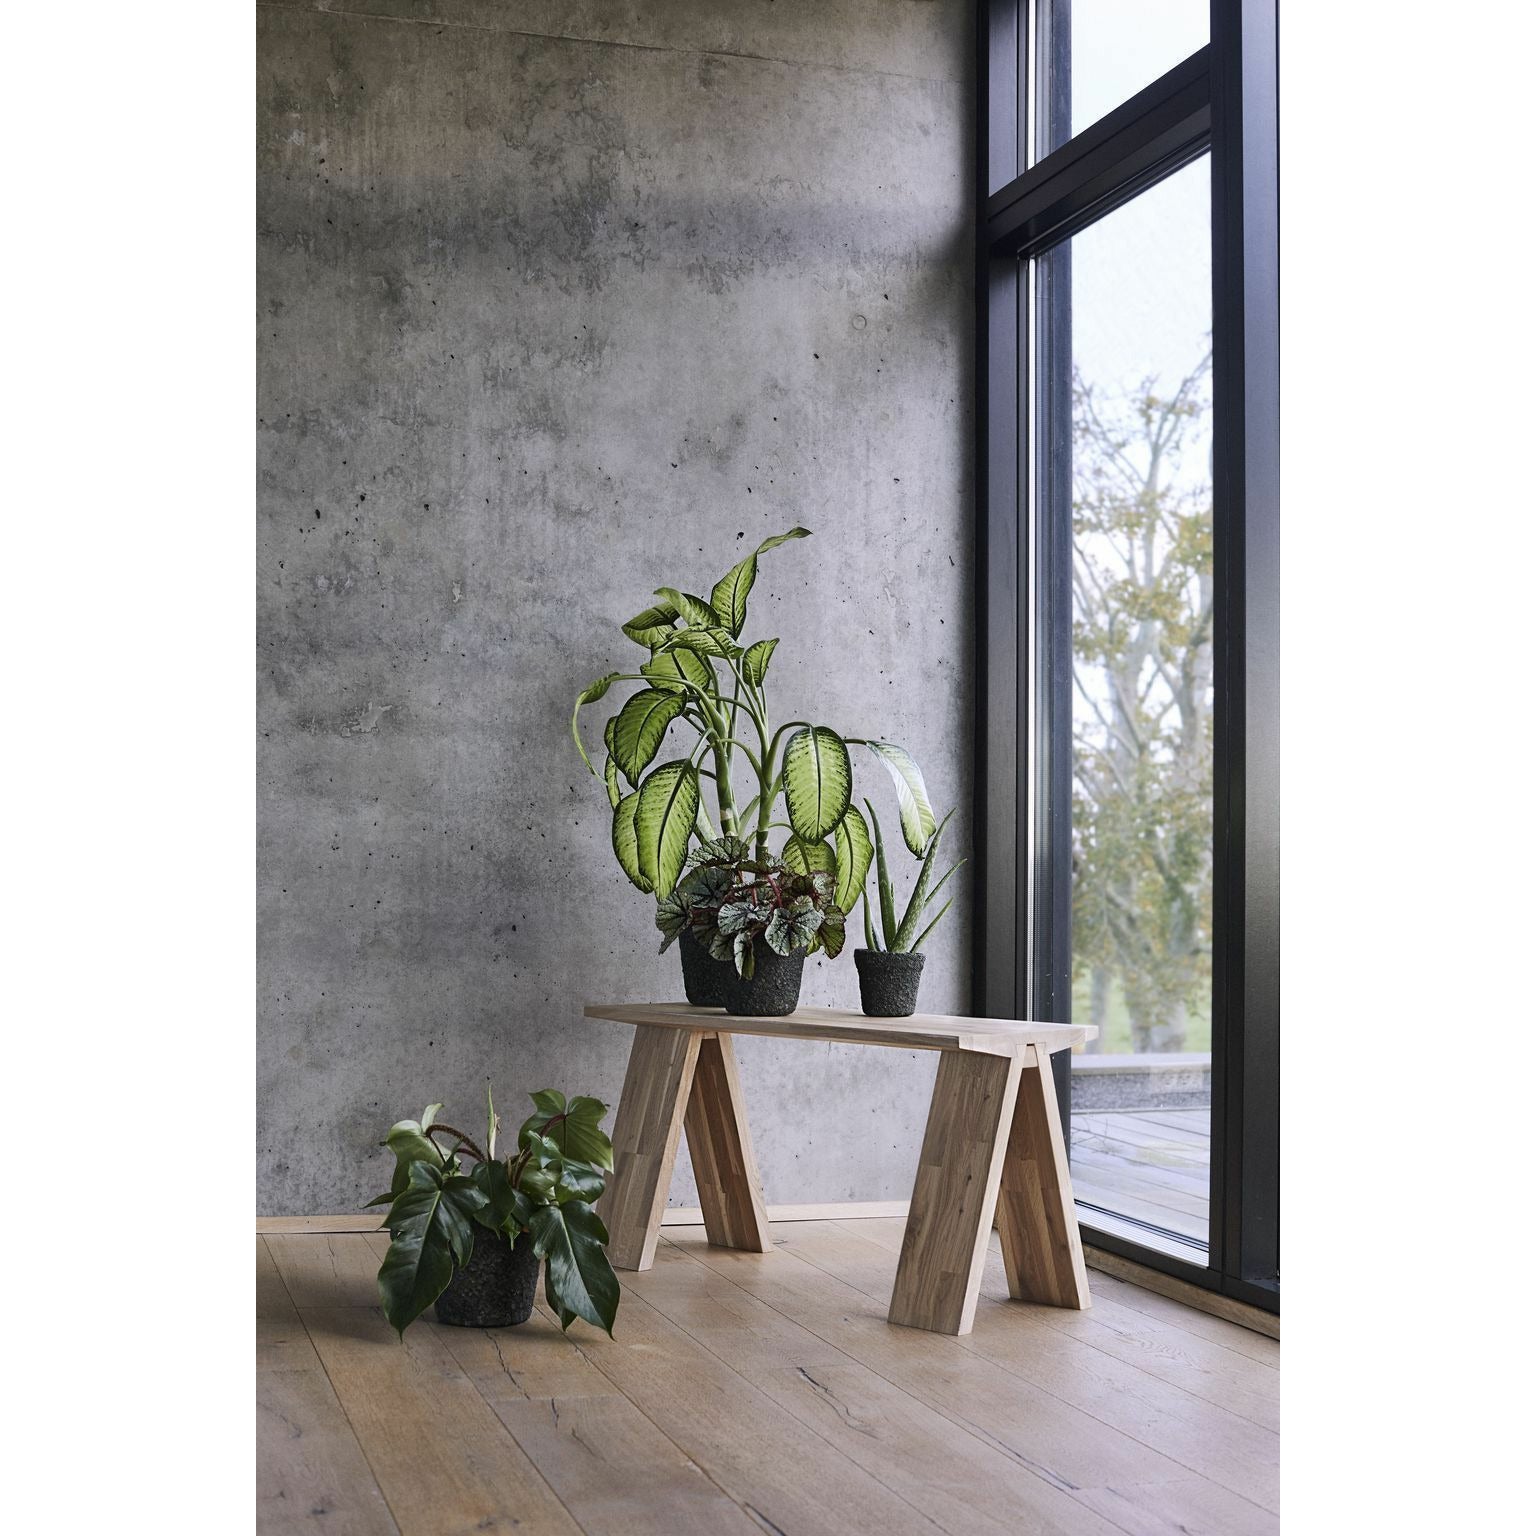 Muubs Angle Bench 90 Cm, Natural